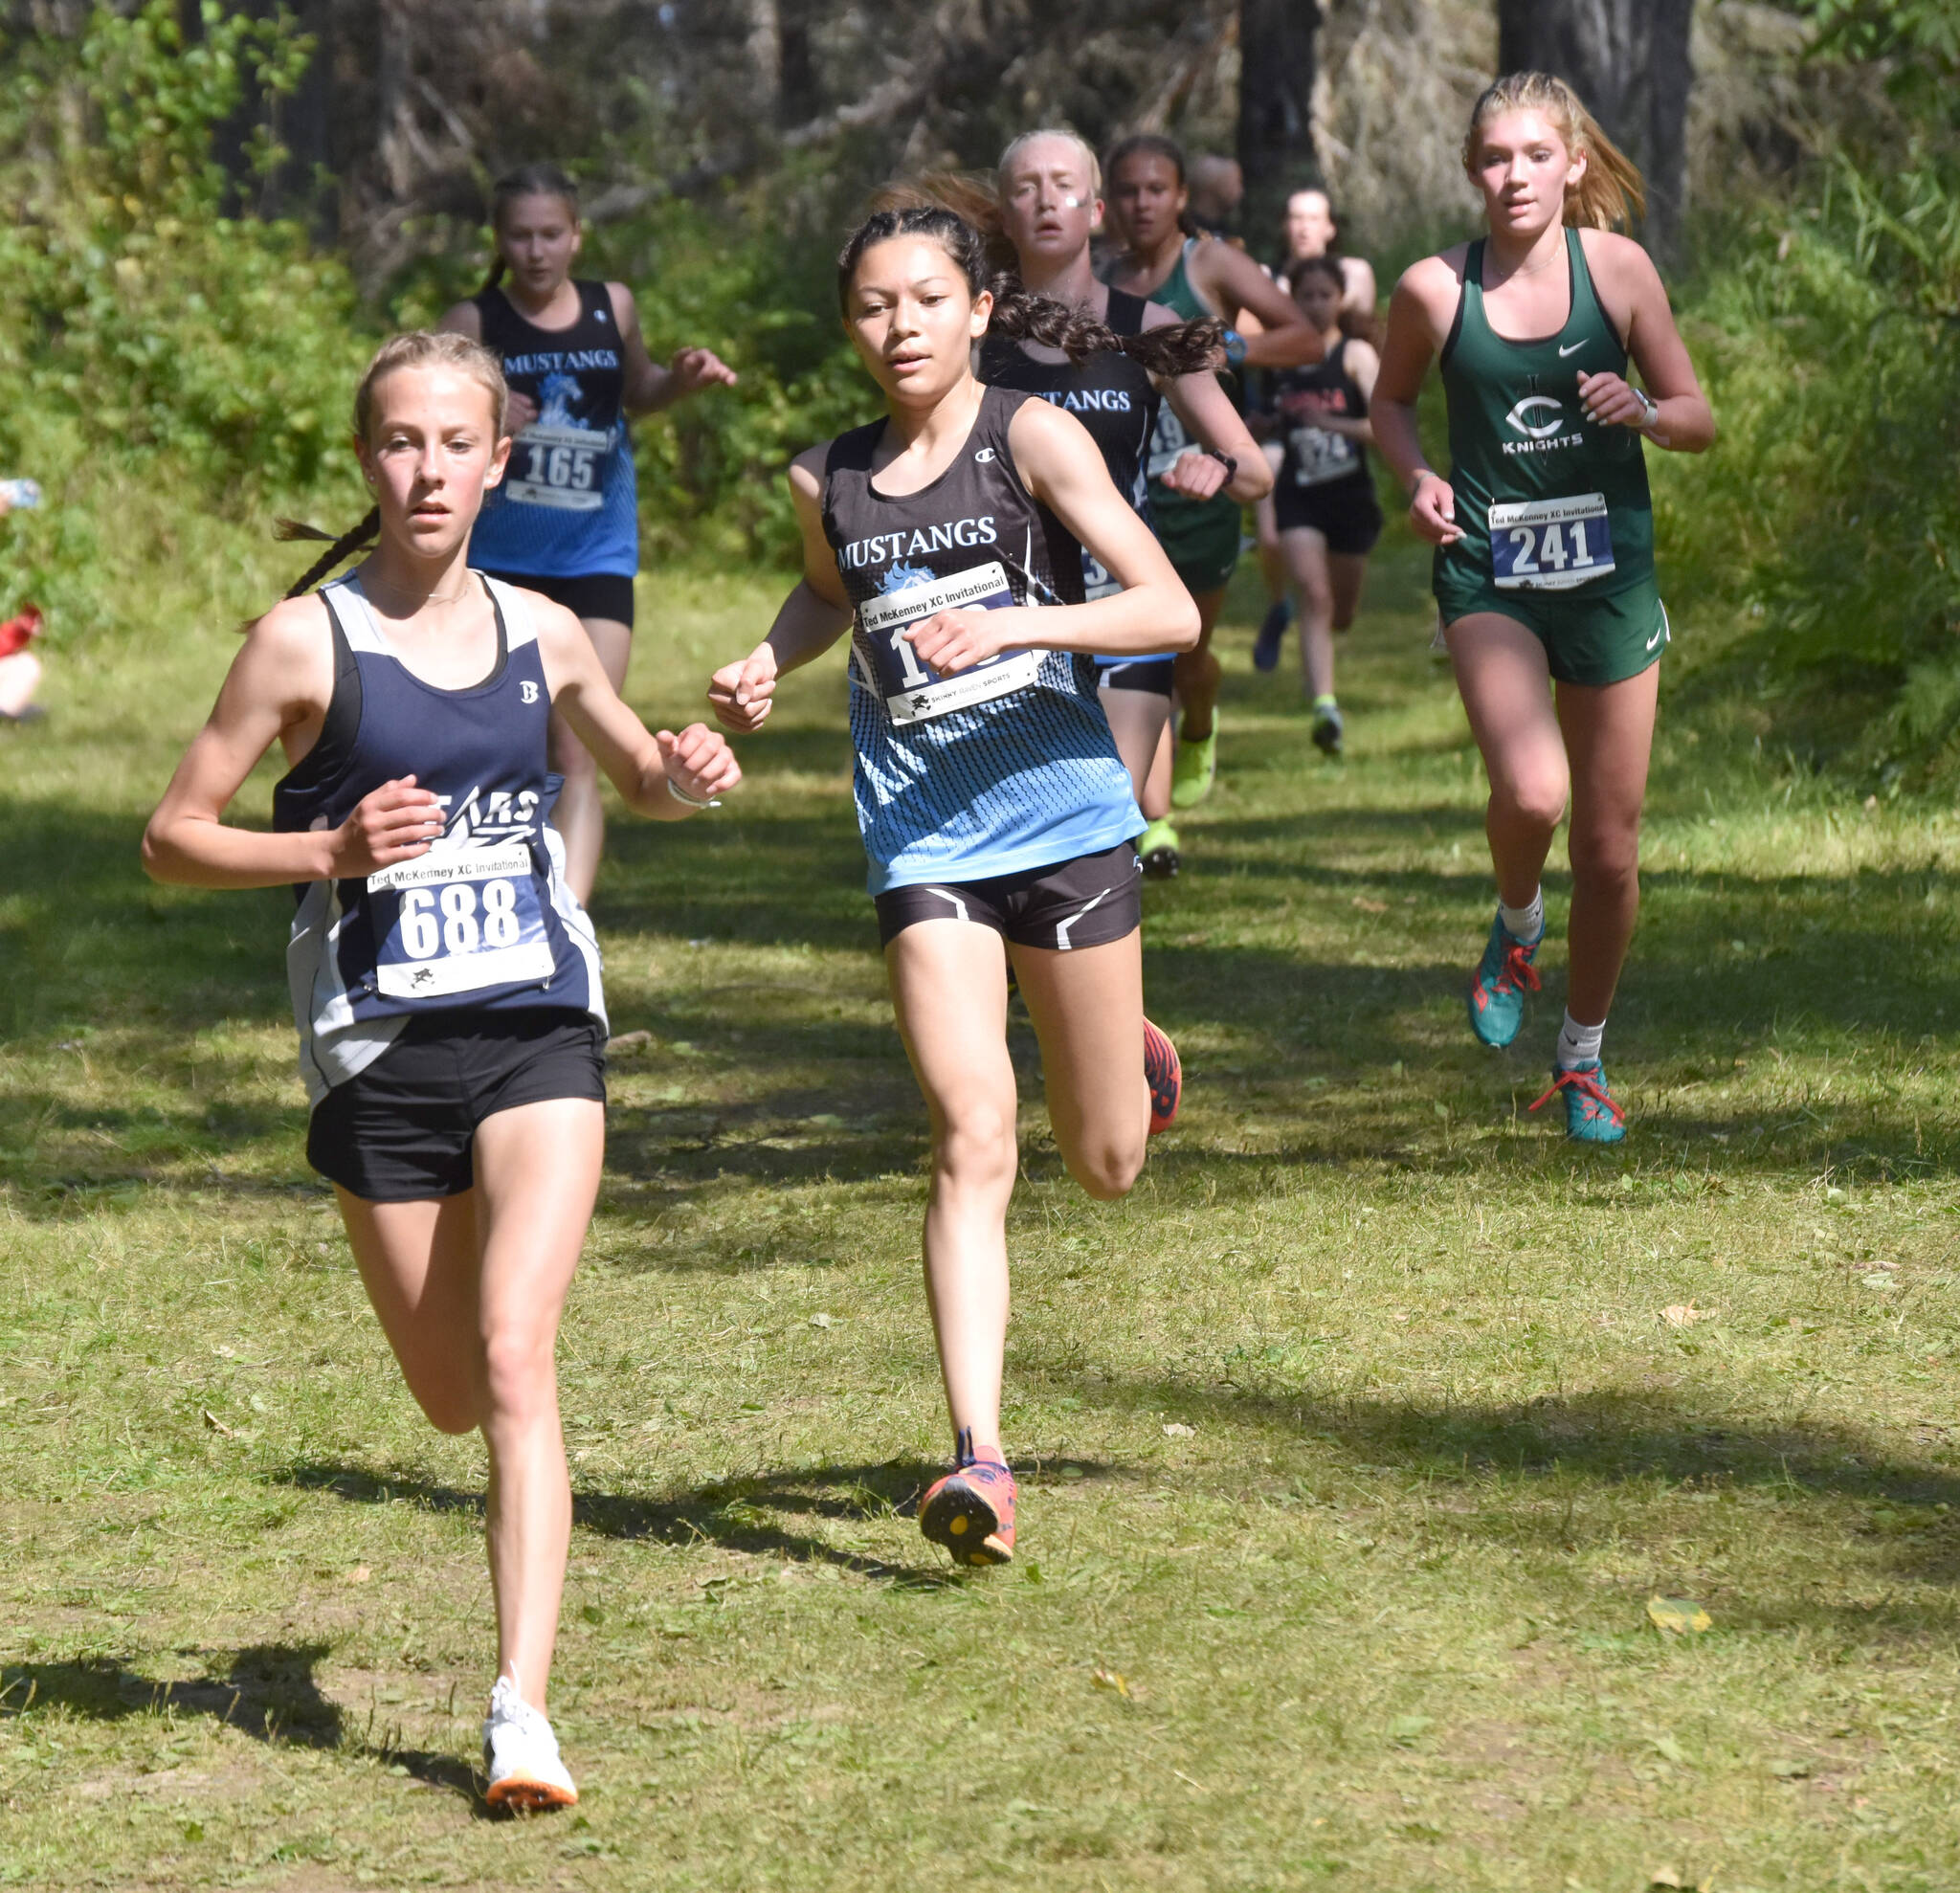 Soldotna’s Tania Boonstra leads a pack of runners down a hill at the midway point of the girls varsity race at the Ted McKenney XC Invitational on Saturday, Aug. 19, 2023, at Tsalteshi Trails just outside of Soldotna, Alaska. (Photo by Jeff Helminiak/Peninsula Clarion)